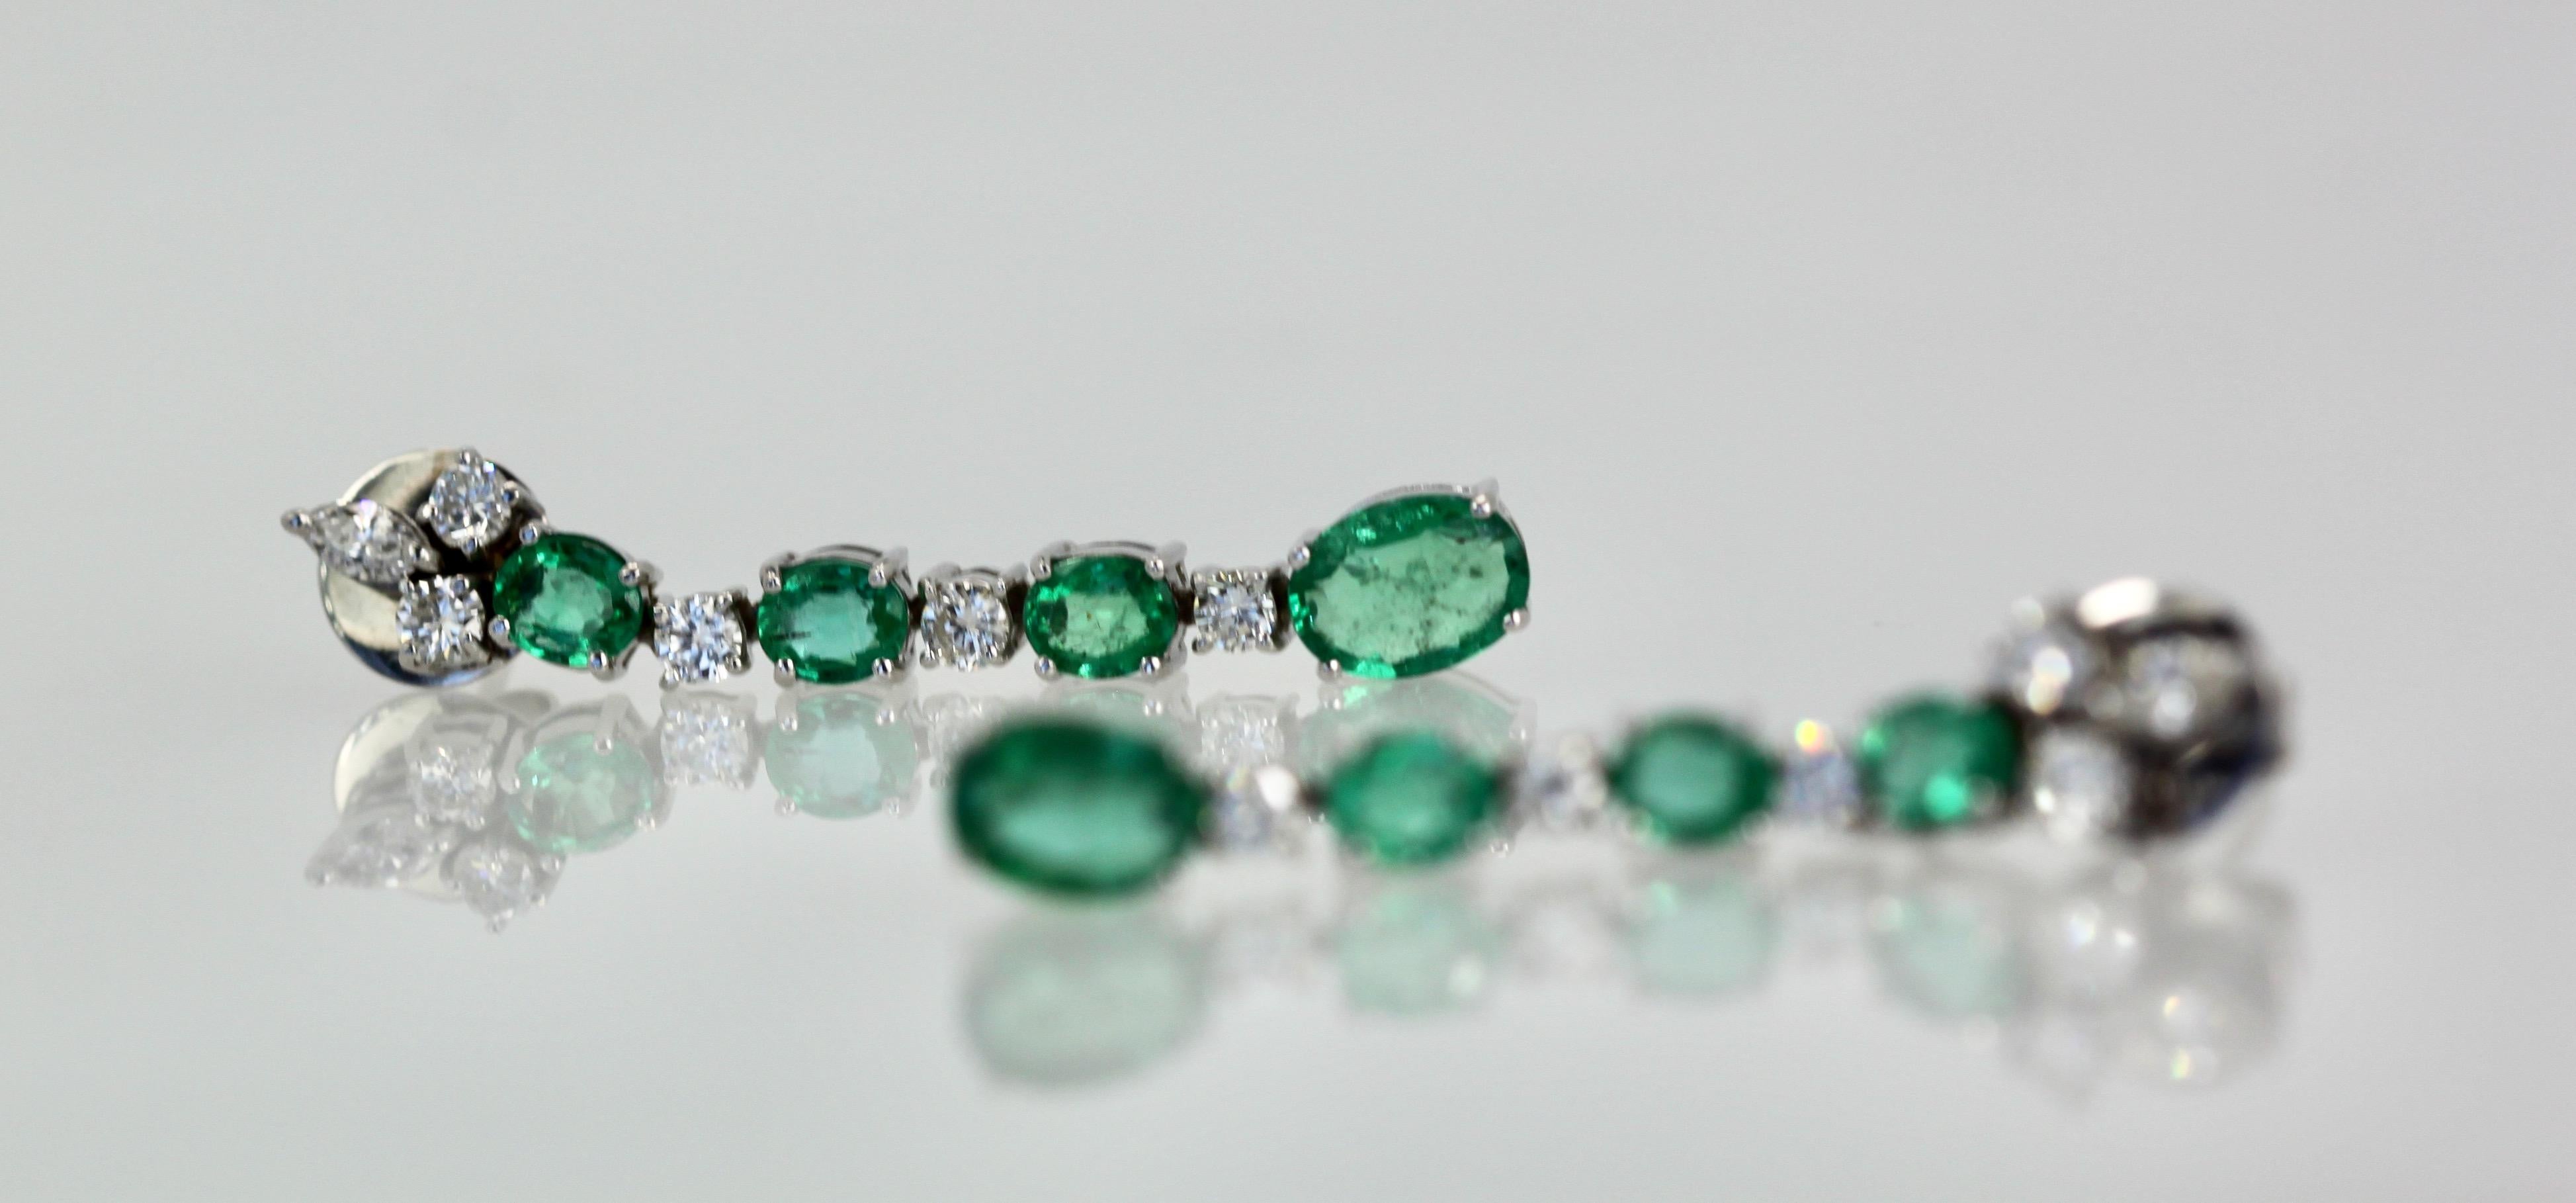 These lovely Emerald Drop Earrings are done in 18K White Gold and is set with 4 Emeralds each, 6 Diamonds of 0.15 points each, 3 Emeralds of approximately 1/2 Carat each and the bottom Emerald 1 carat each. TCW is 5 carats. The length of these